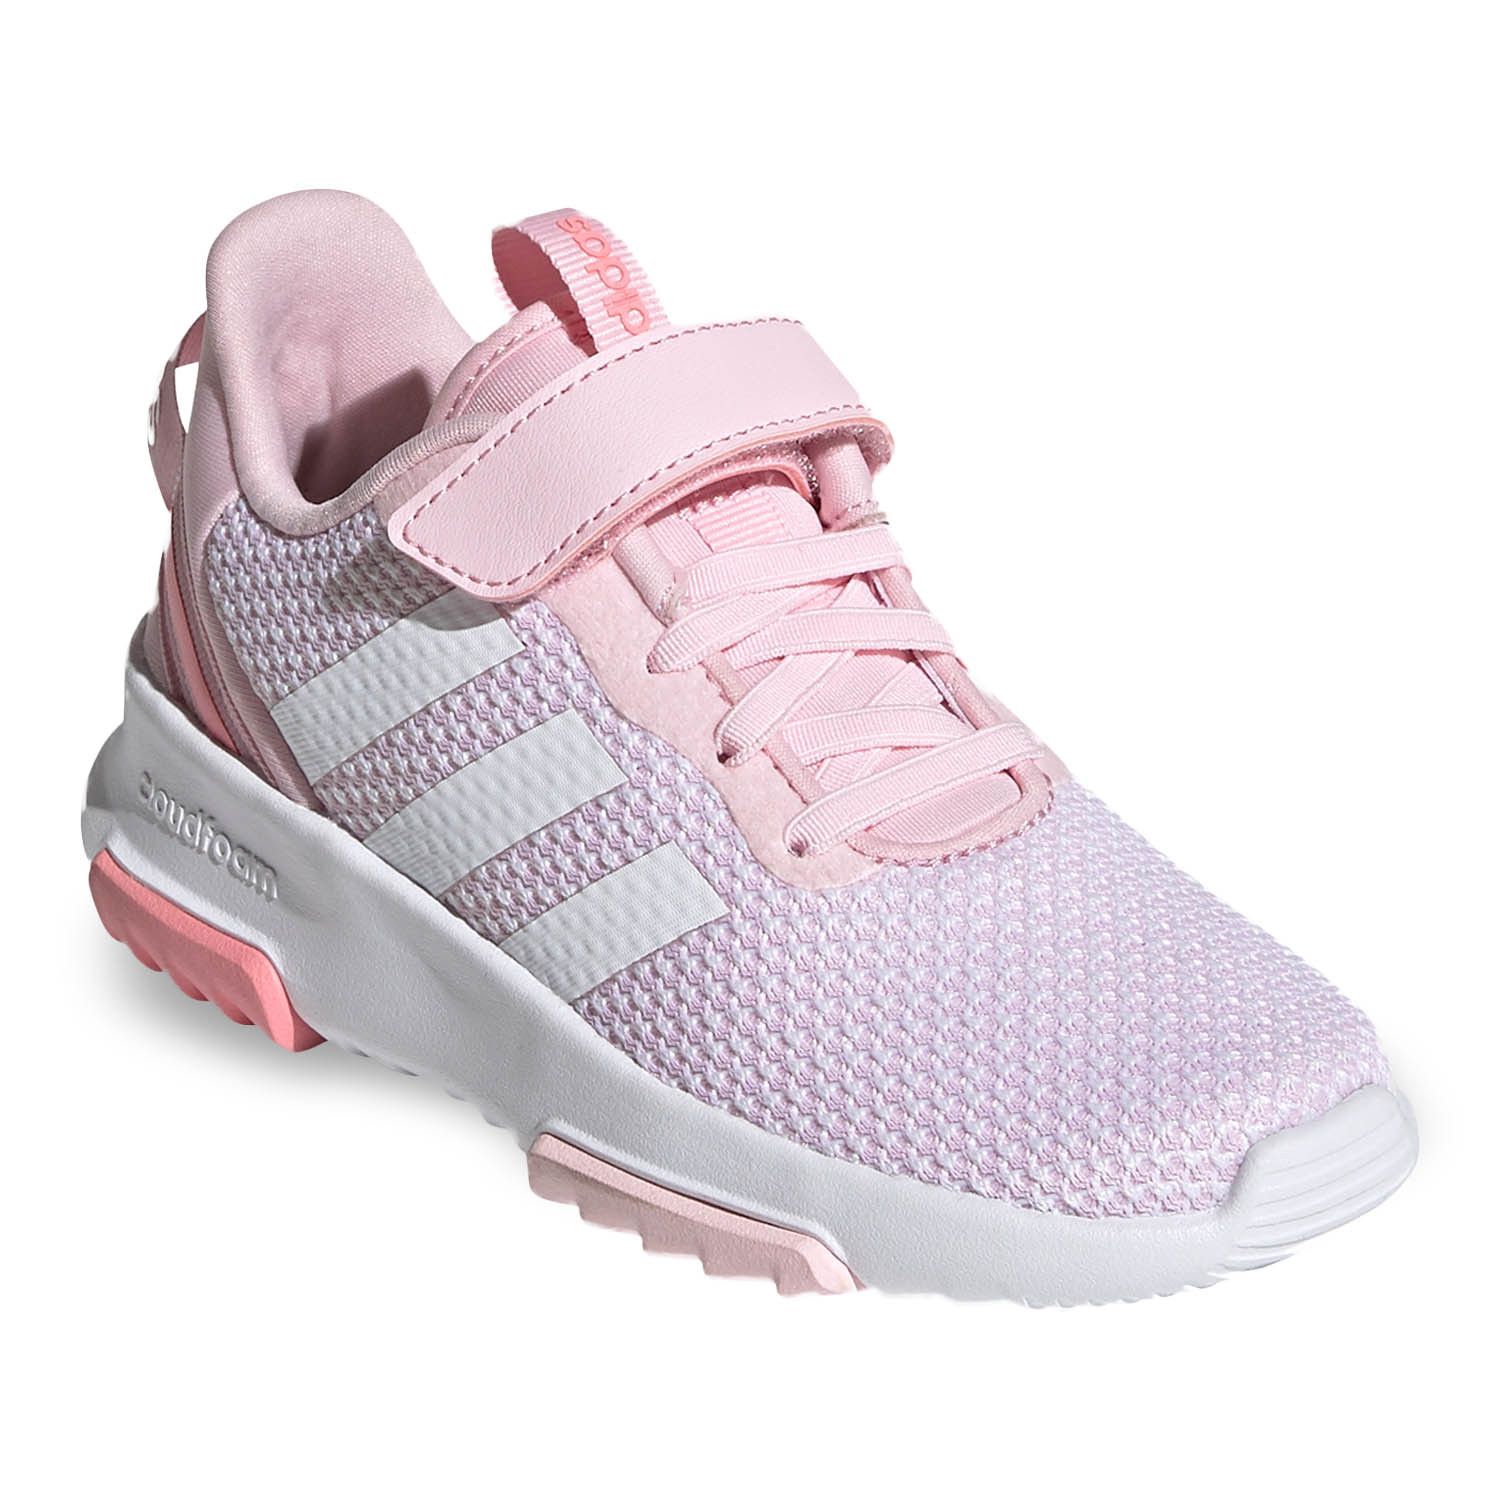 sports shoes for girls adidas